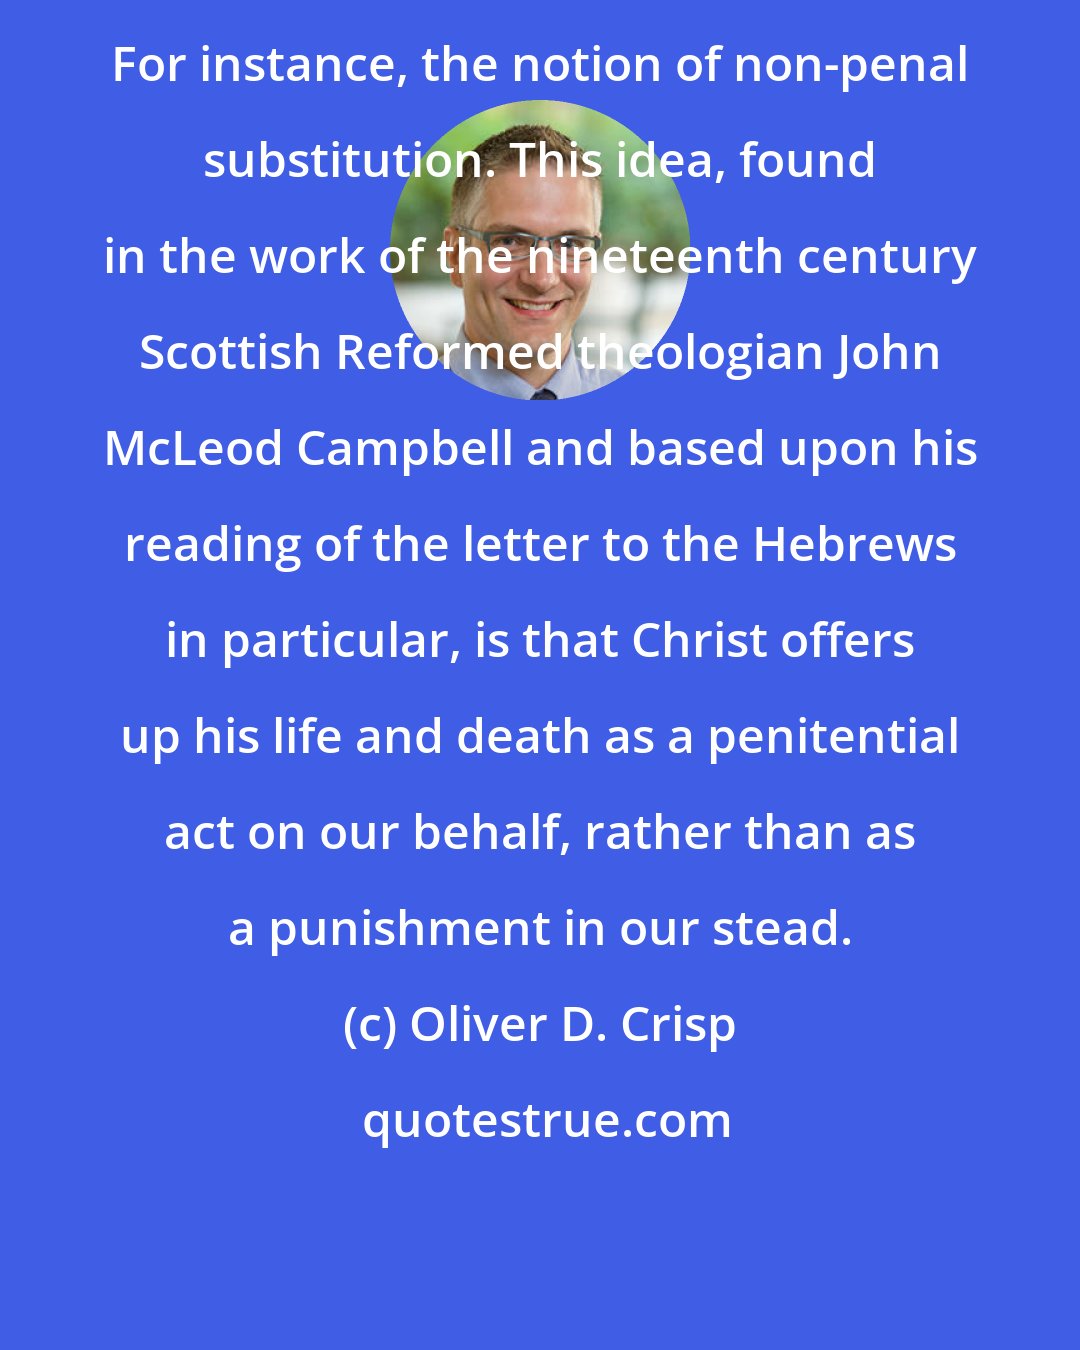 Oliver D. Crisp: For instance, the notion of non-penal substitution. This idea, found in the work of the nineteenth century Scottish Reformed theologian John McLeod Campbell and based upon his reading of the letter to the Hebrews in particular, is that Christ offers up his life and death as a penitential act on our behalf, rather than as a punishment in our stead.